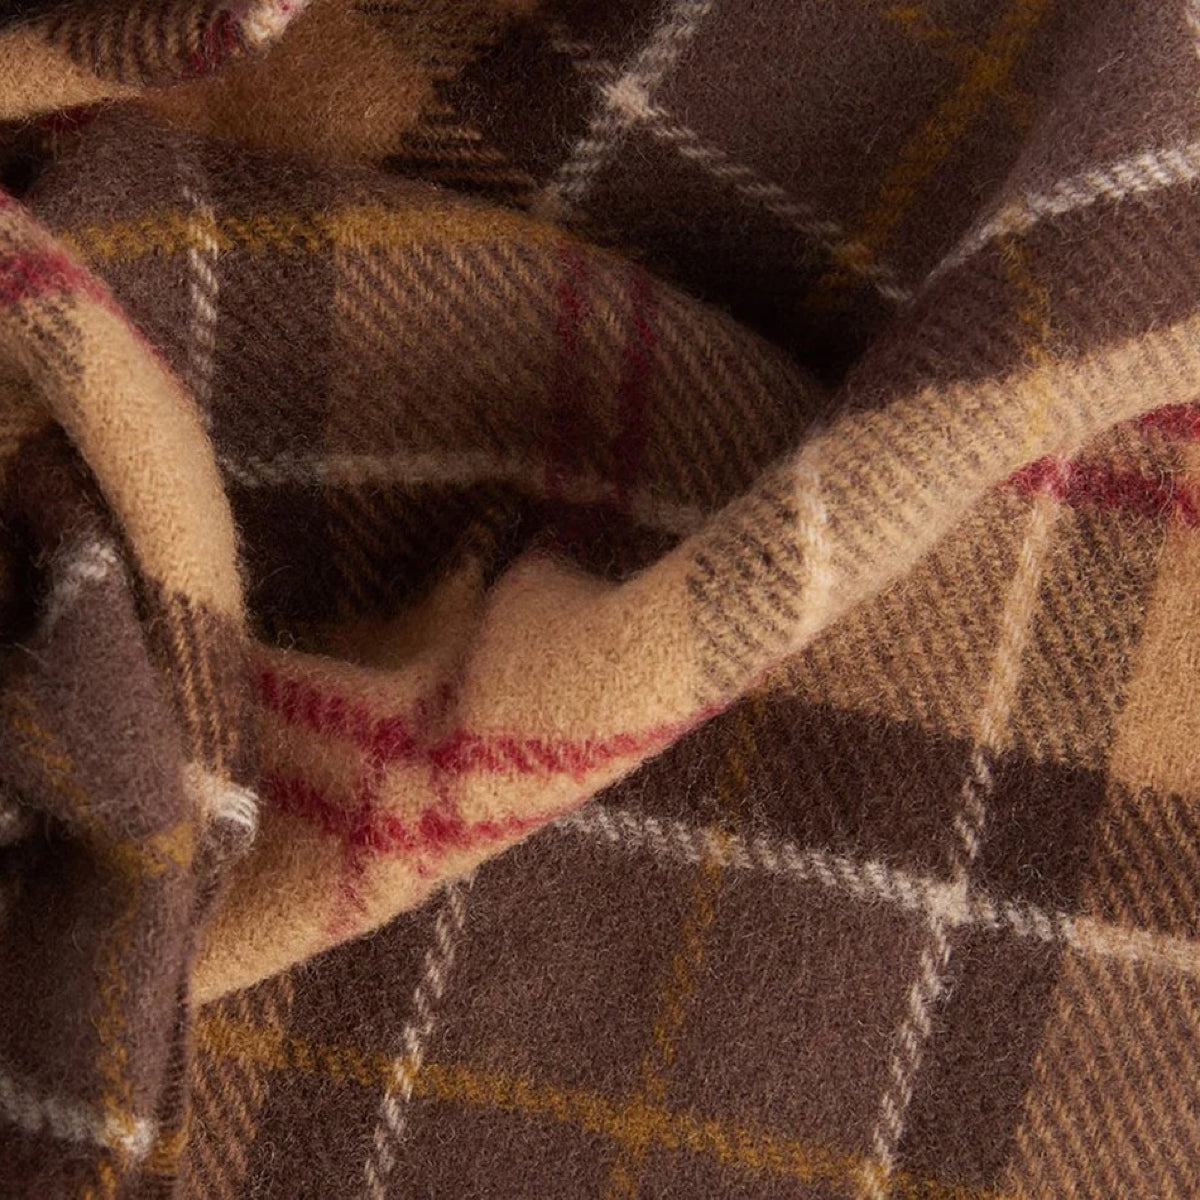 Barbour Tartan Lambswool Scarf | Muted